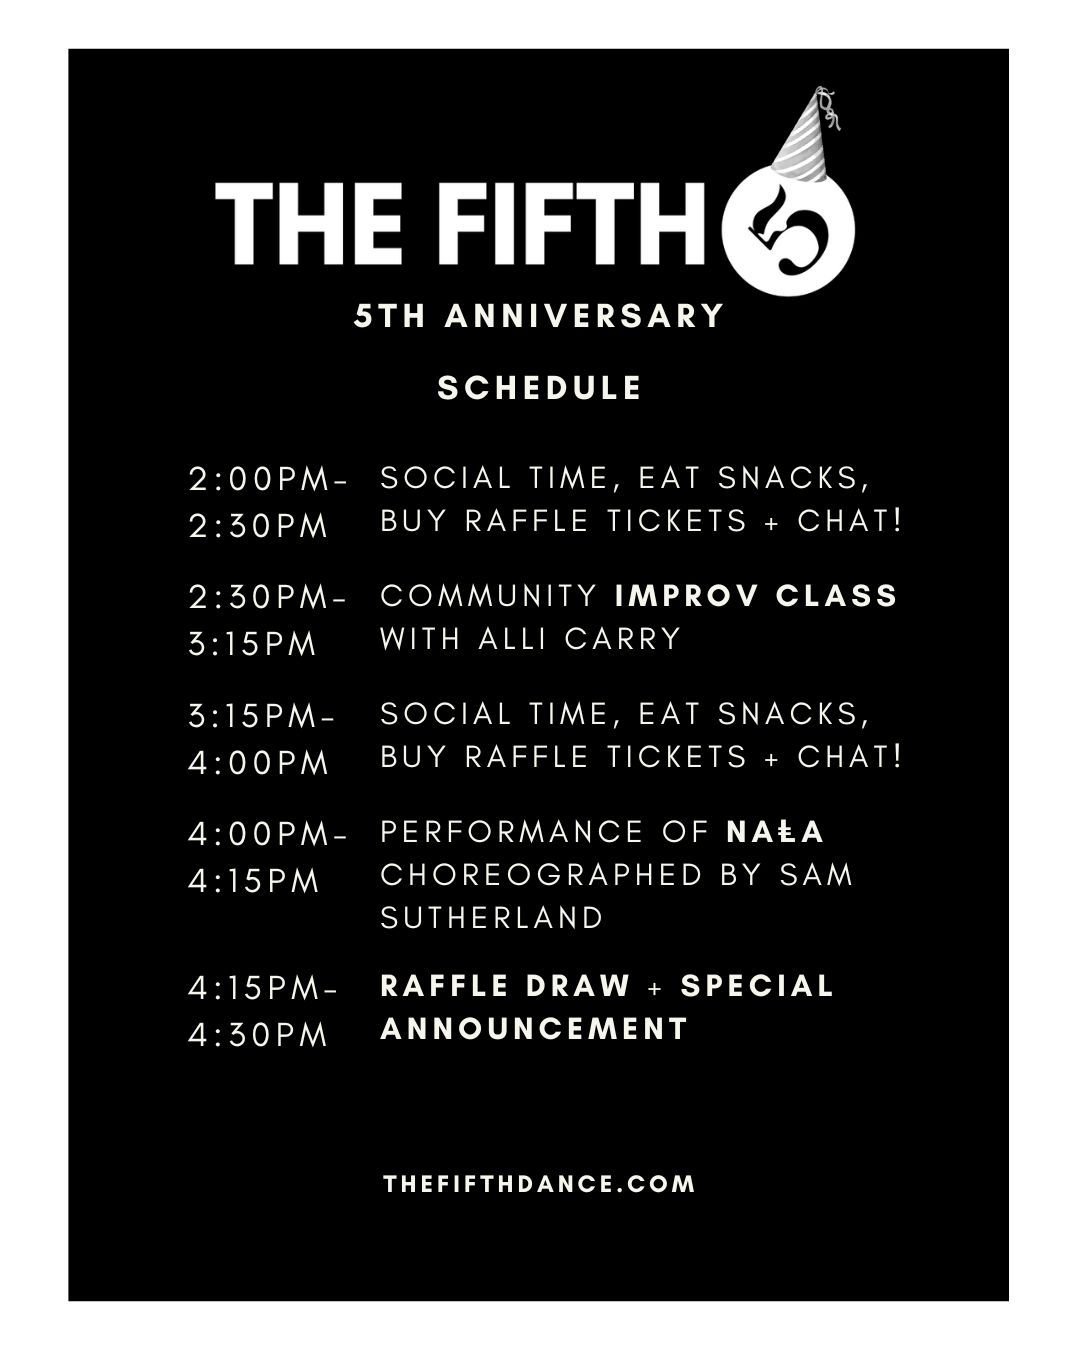 TOMORROW'S THE BIG DAY! 🎂

Here's the schedule for our fifth-anniversary celebration !! 

2:00 PM-2:30 PM - Social time, eat snacks, buy raffle tickets + chat!

2:30 PM-3:15 PM - Community Improv class with Alli Carry @alli_carry 

3:15 PM-4:00 PM -